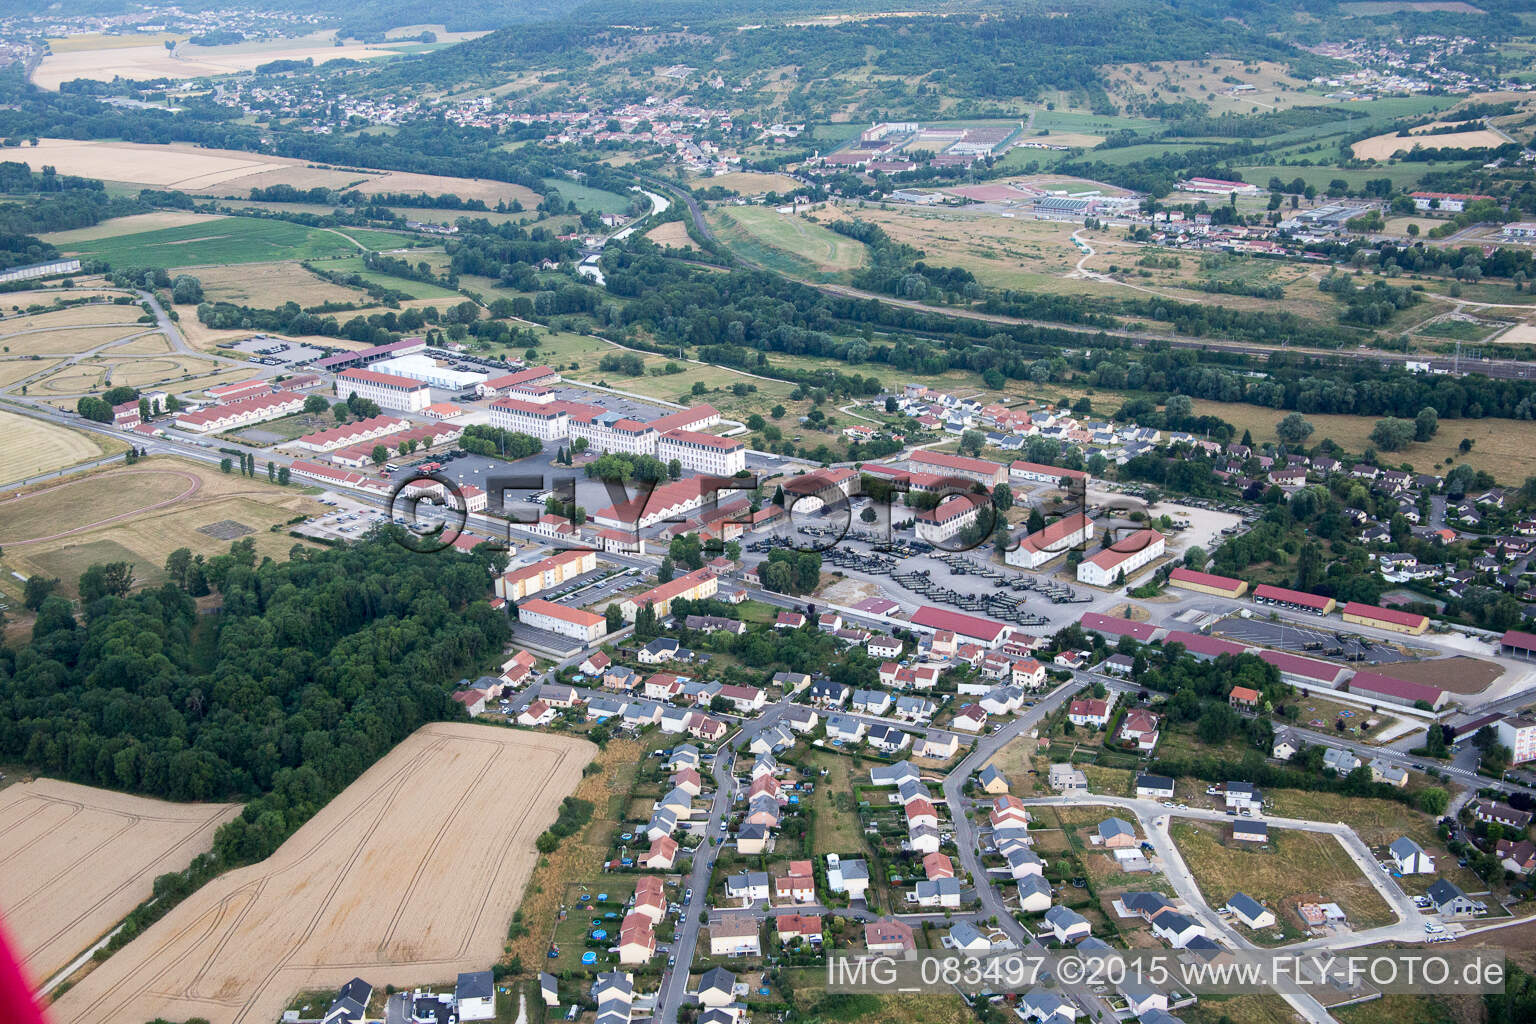 Aerial view of Building complex of the French army - military barracks of the 516th railway Regiment in Ecrouves in Grand Est, France